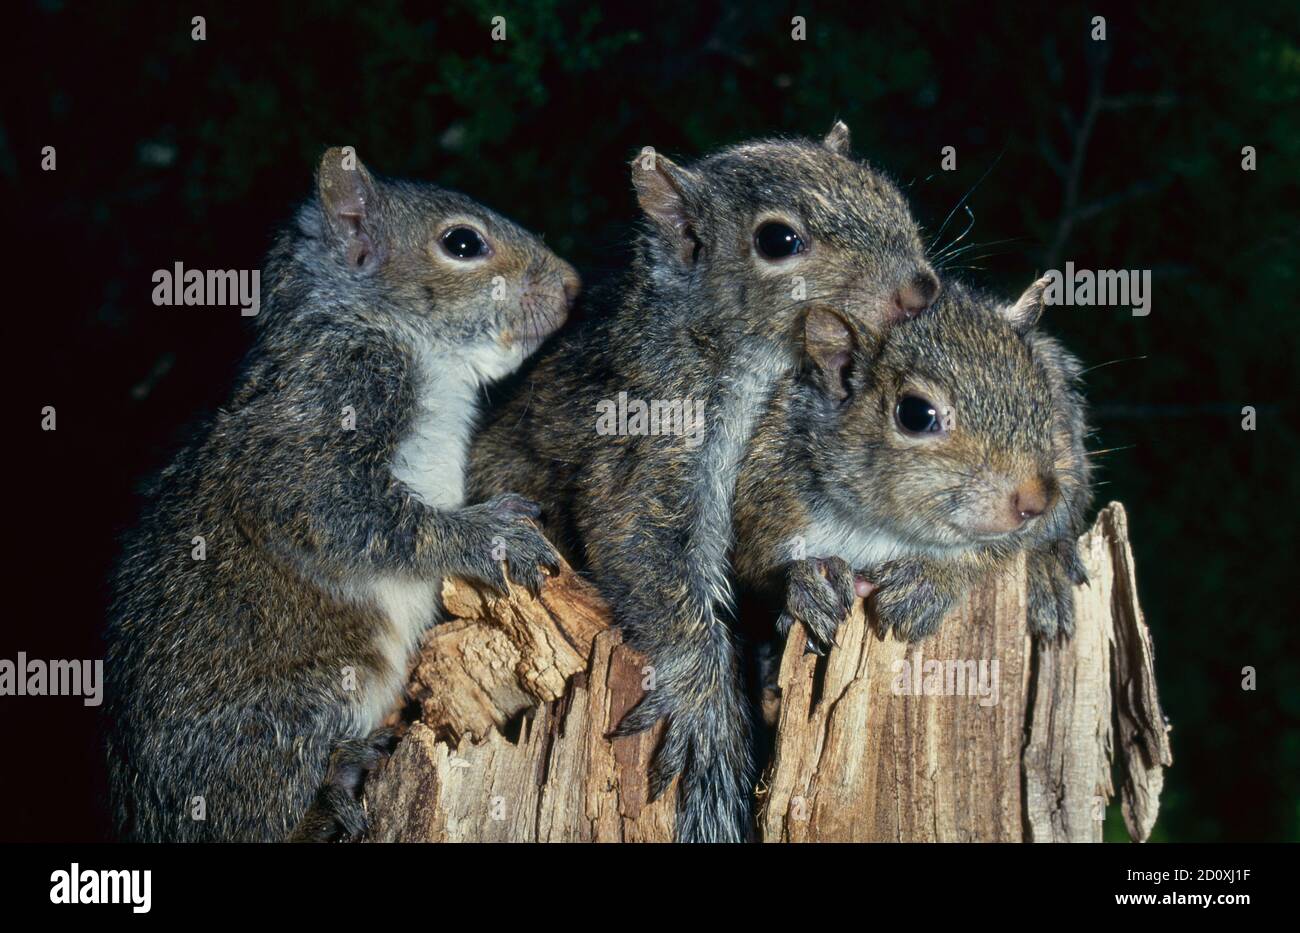 Baby squirrels climbing up tree and emerging from nest in old dead tree, Missouri, USA Stock Photo